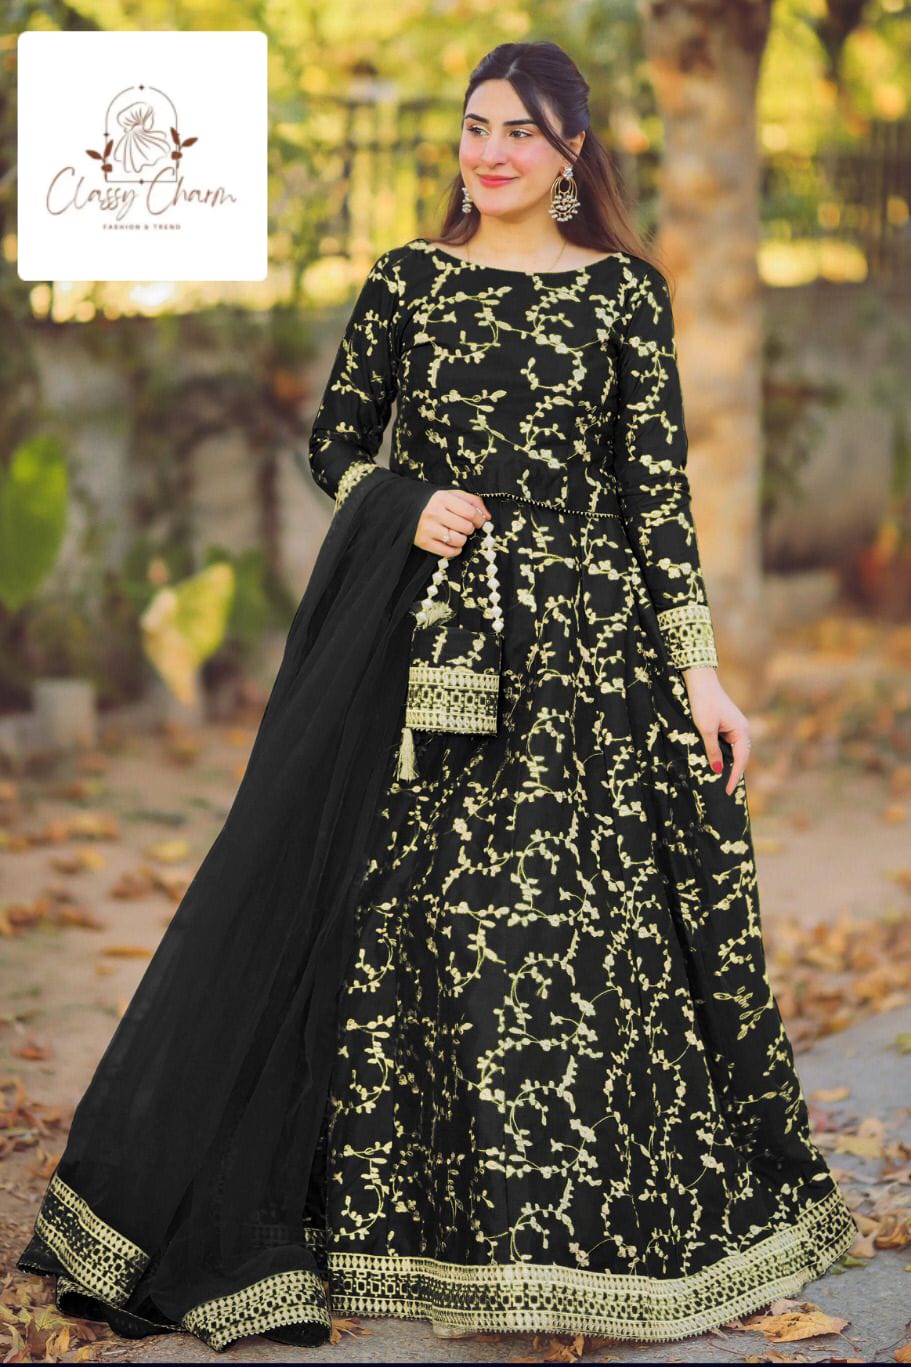 4 PIECE EMBROIDERED TOP WITH LONG FLARE EMBROIDERY SKIRT AND FOUR SIDE BORDER EMBROIDERED DUPATTA WITH EIDI POTLI